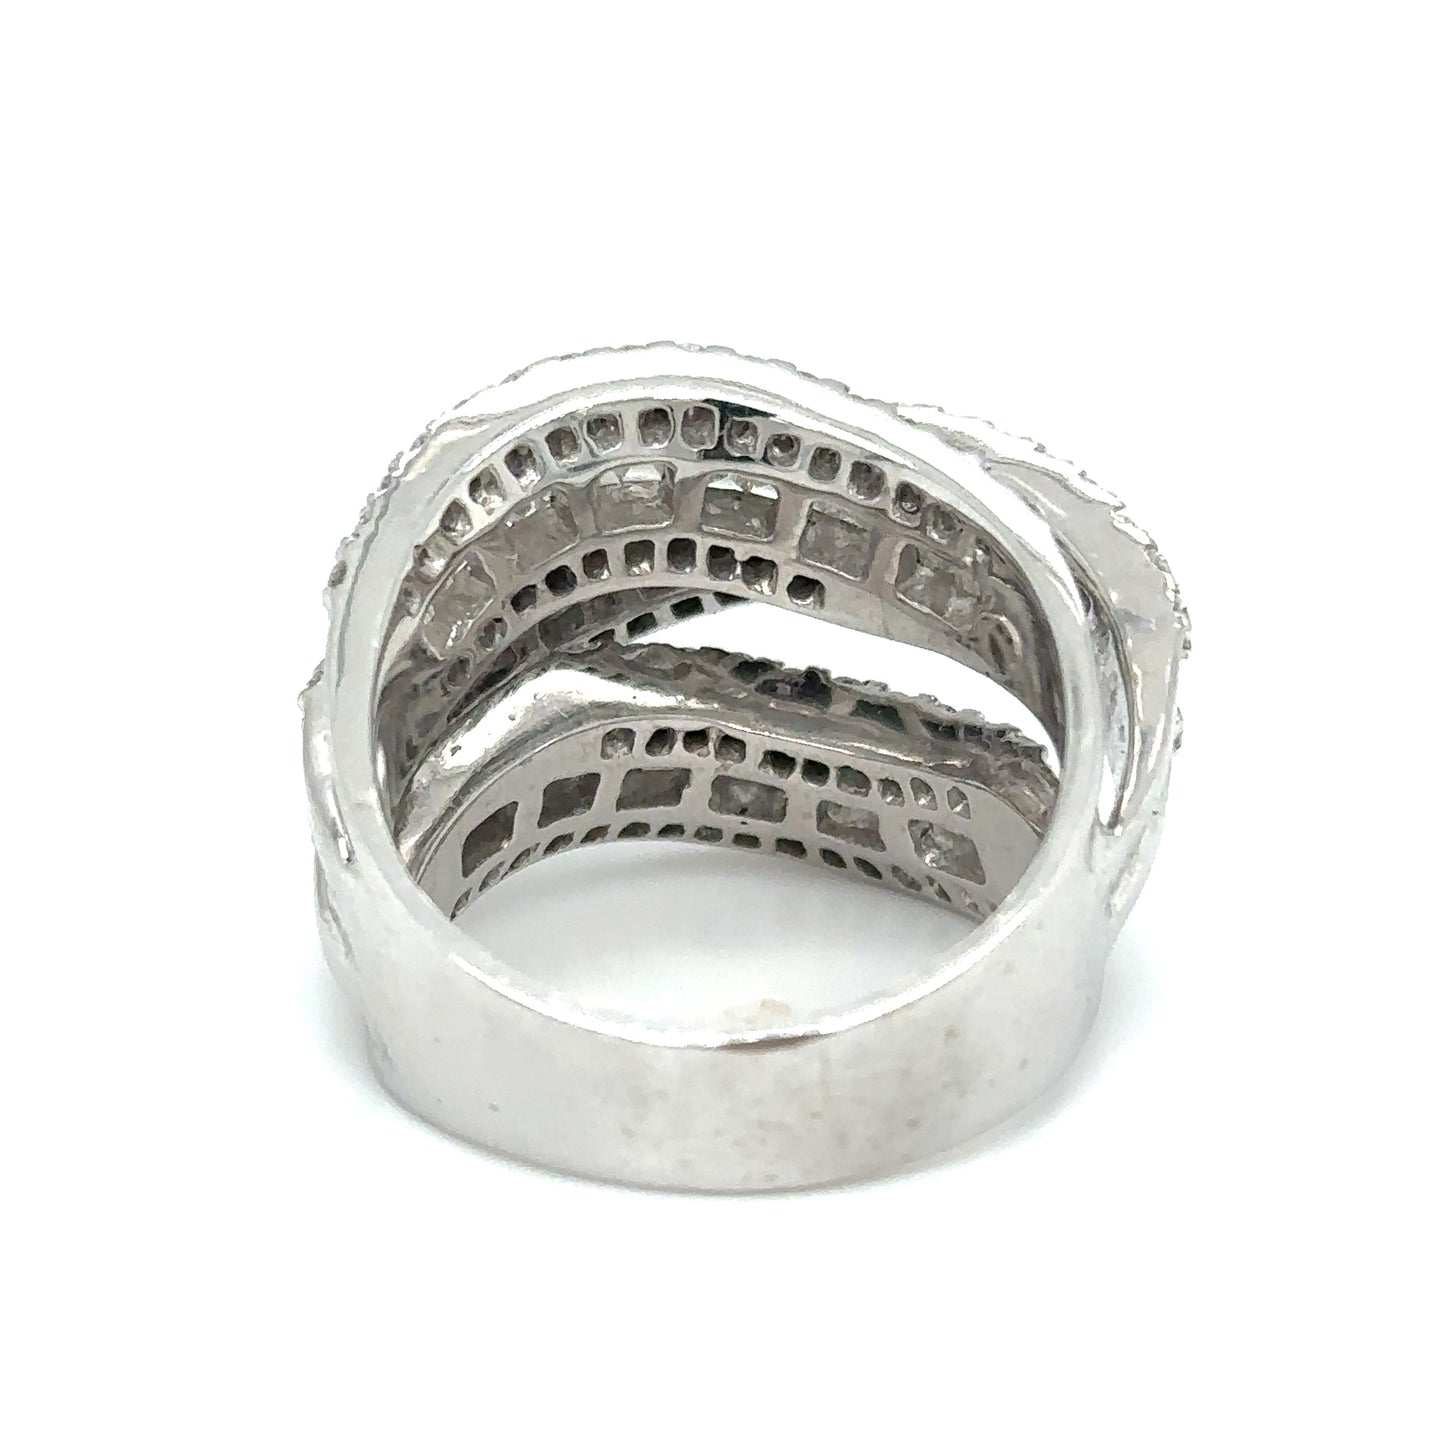 6.0 CTW Diamond Overlapping Multi Row Cocktail Ring in 18K White Gold